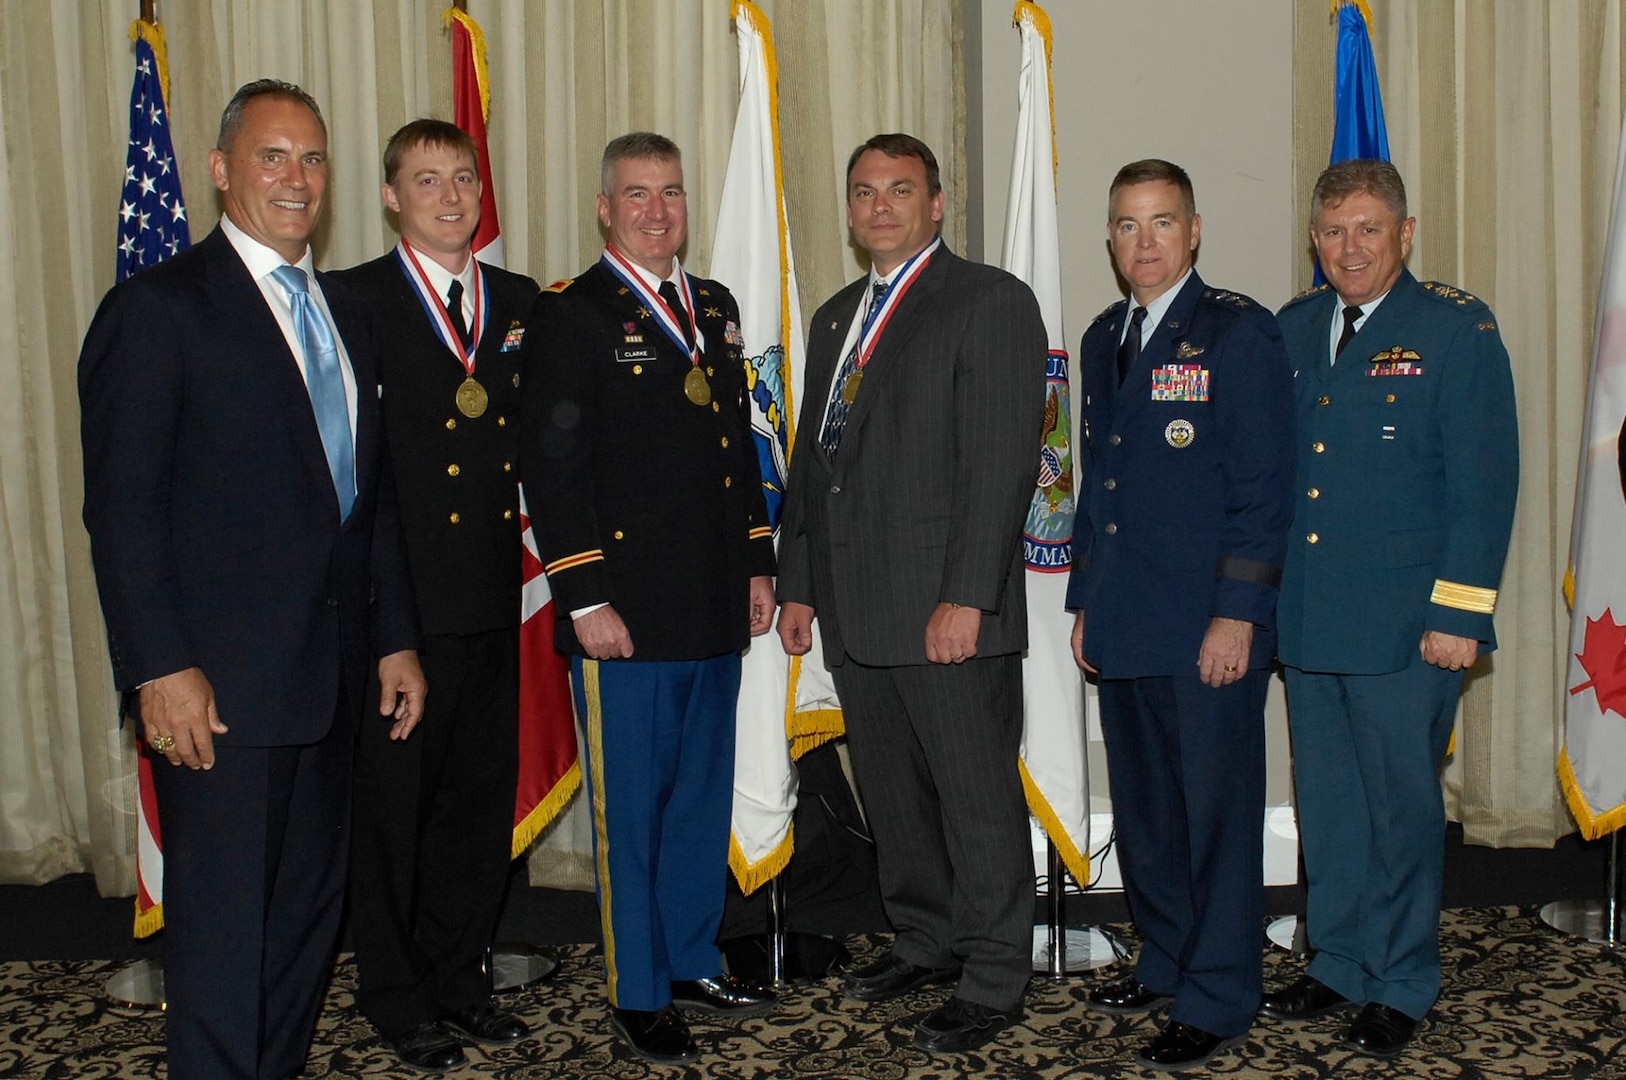 Outstanding NORAD-USNORTHCOM members were recognized during the Missile Warning and Defender of the Year Award Ceremony on May 2nd, 2014 at the Mining Exchange Hotel in Colorado Springs.(l-r) Mr. Rikki Ellison, Founder and Chairman, MDAA, LCDR Tim Ladowicz, Col Fred Clarke, Mr. Jeff Dillemuth, (missing) Lt Col Rickey McCann. They are accompanied by USNORTHCOM Deputy Commander Gen Michael Dubie and NORAD Deputy Commander, Canadian Lt-Gen Alain Parent.